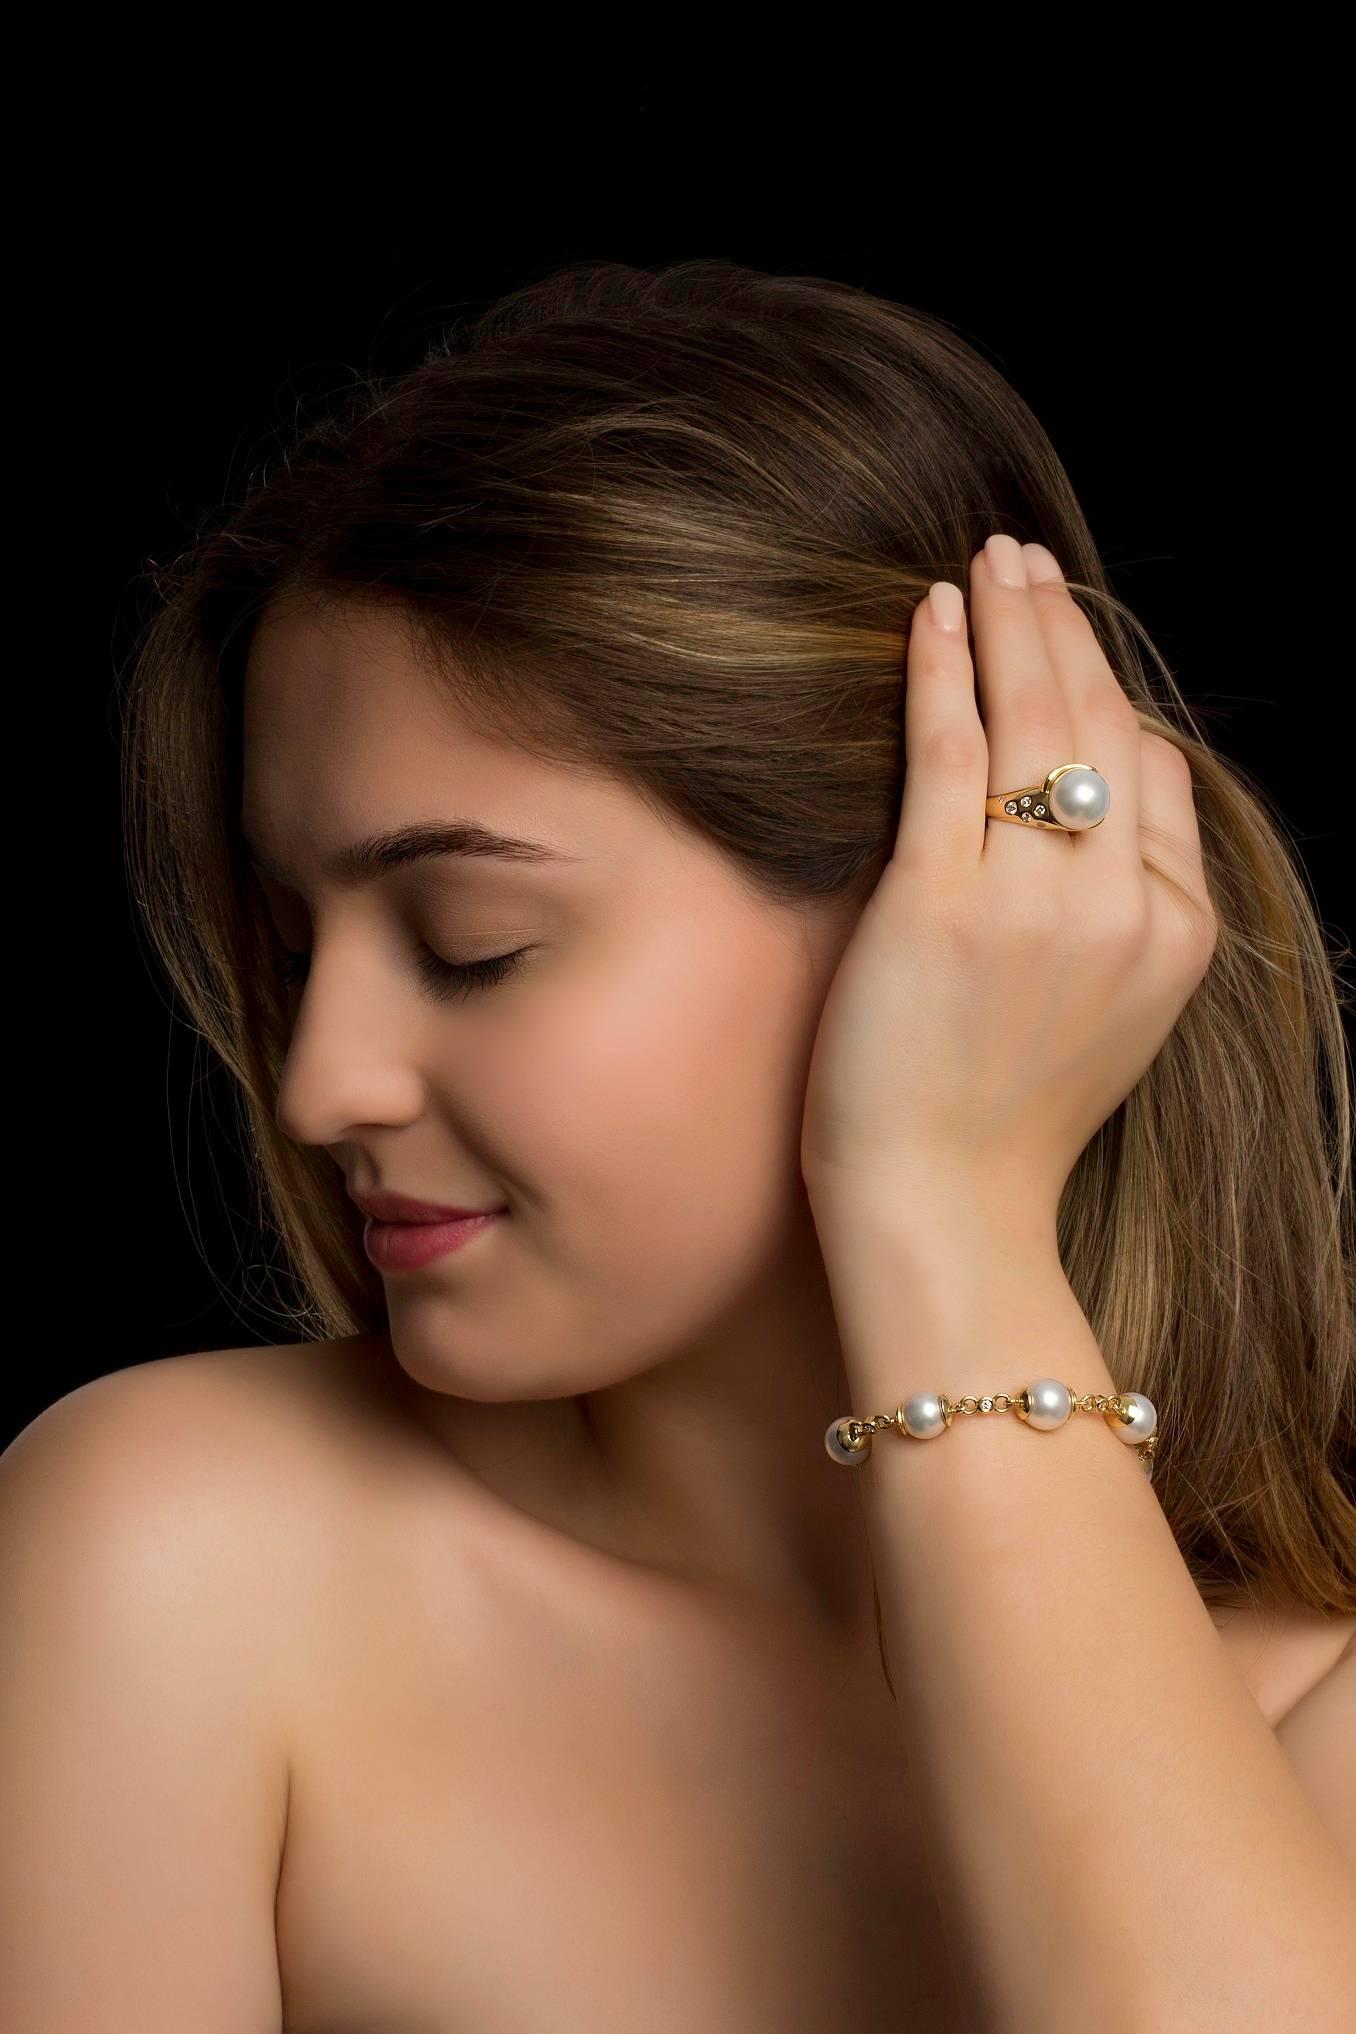 Perla & Diamante Bracelet

This stunning hand made 18ct yellow gold bracelet is set with five South Sea pearls that alternate with petite chenier set diamonds. The bracelet is completed with a fancy toggle clasp.

South Sea pearls: round, high